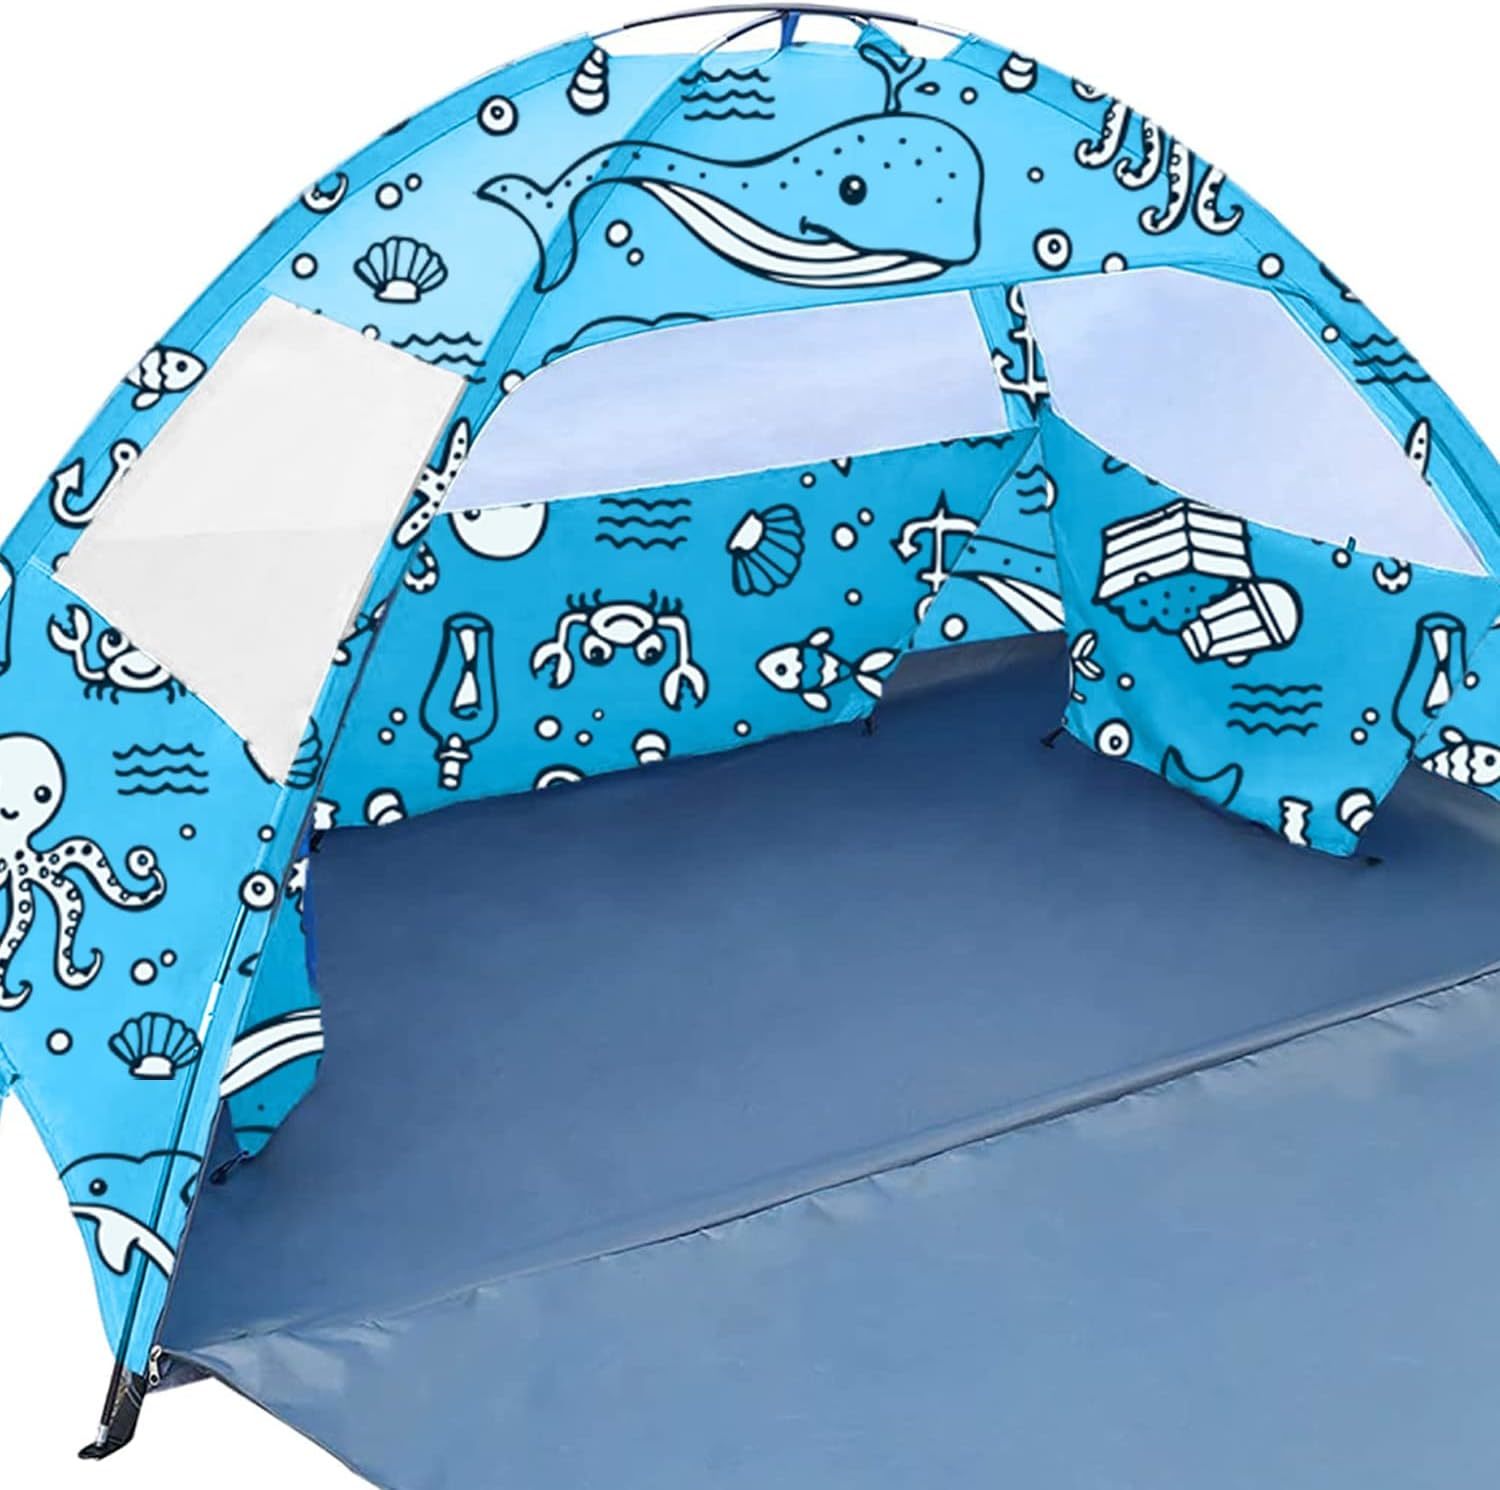 Primary image for Pu800 Waterproof Canopy Cabana | Tent For Beach Or Camping | Ocean World Beach